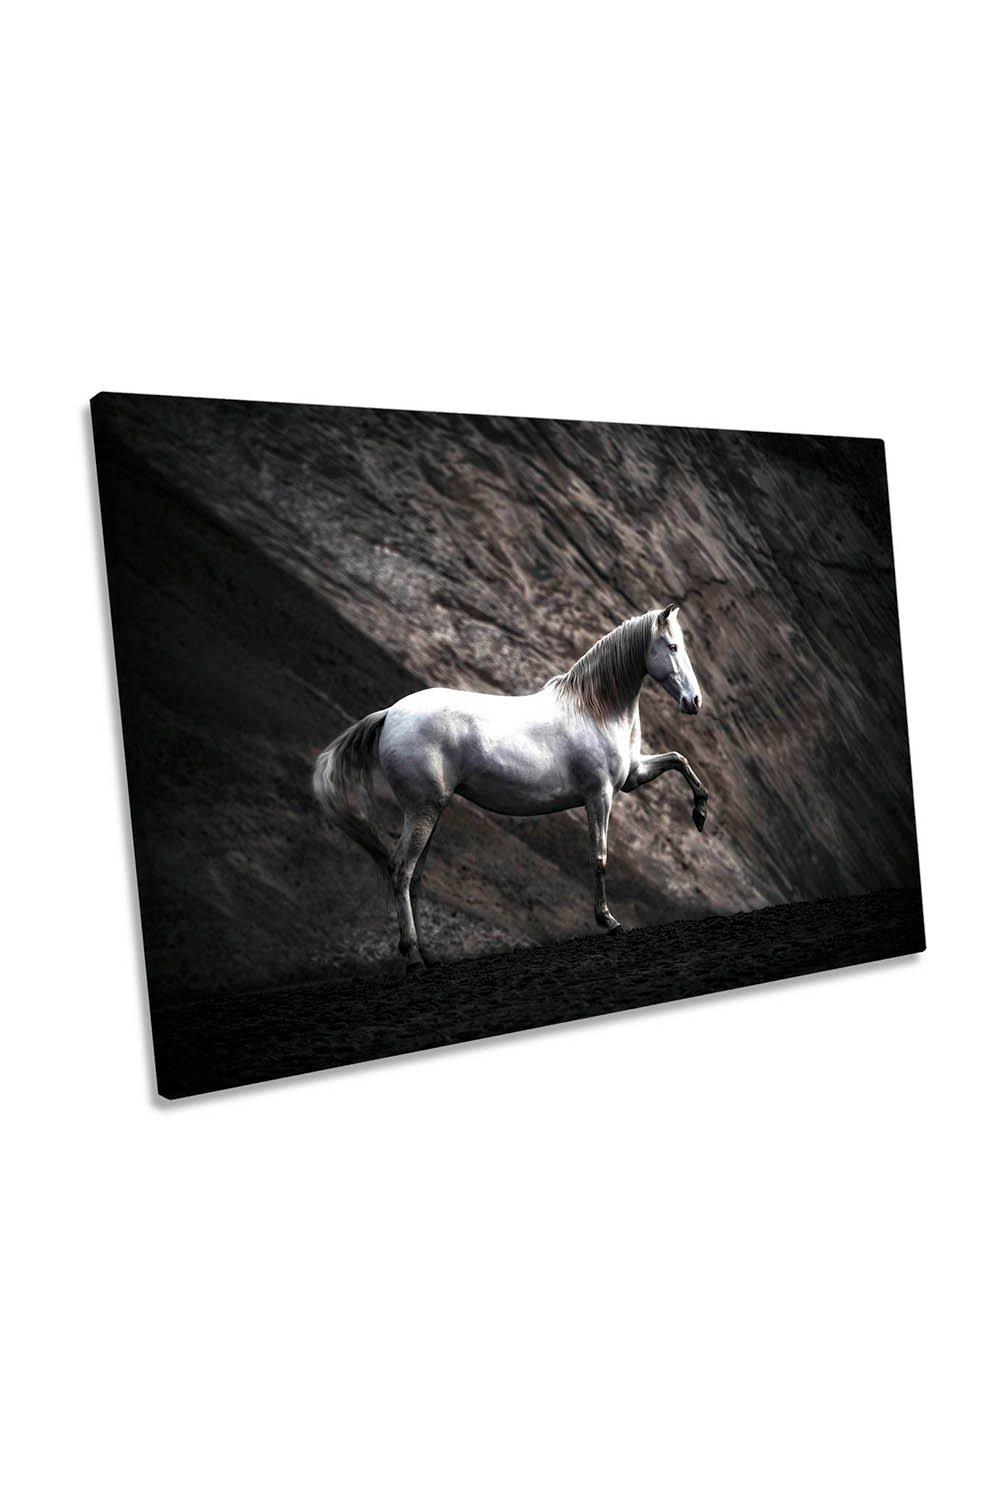 Solitaire White Horse Pose Canvas Wall Art Picture Print